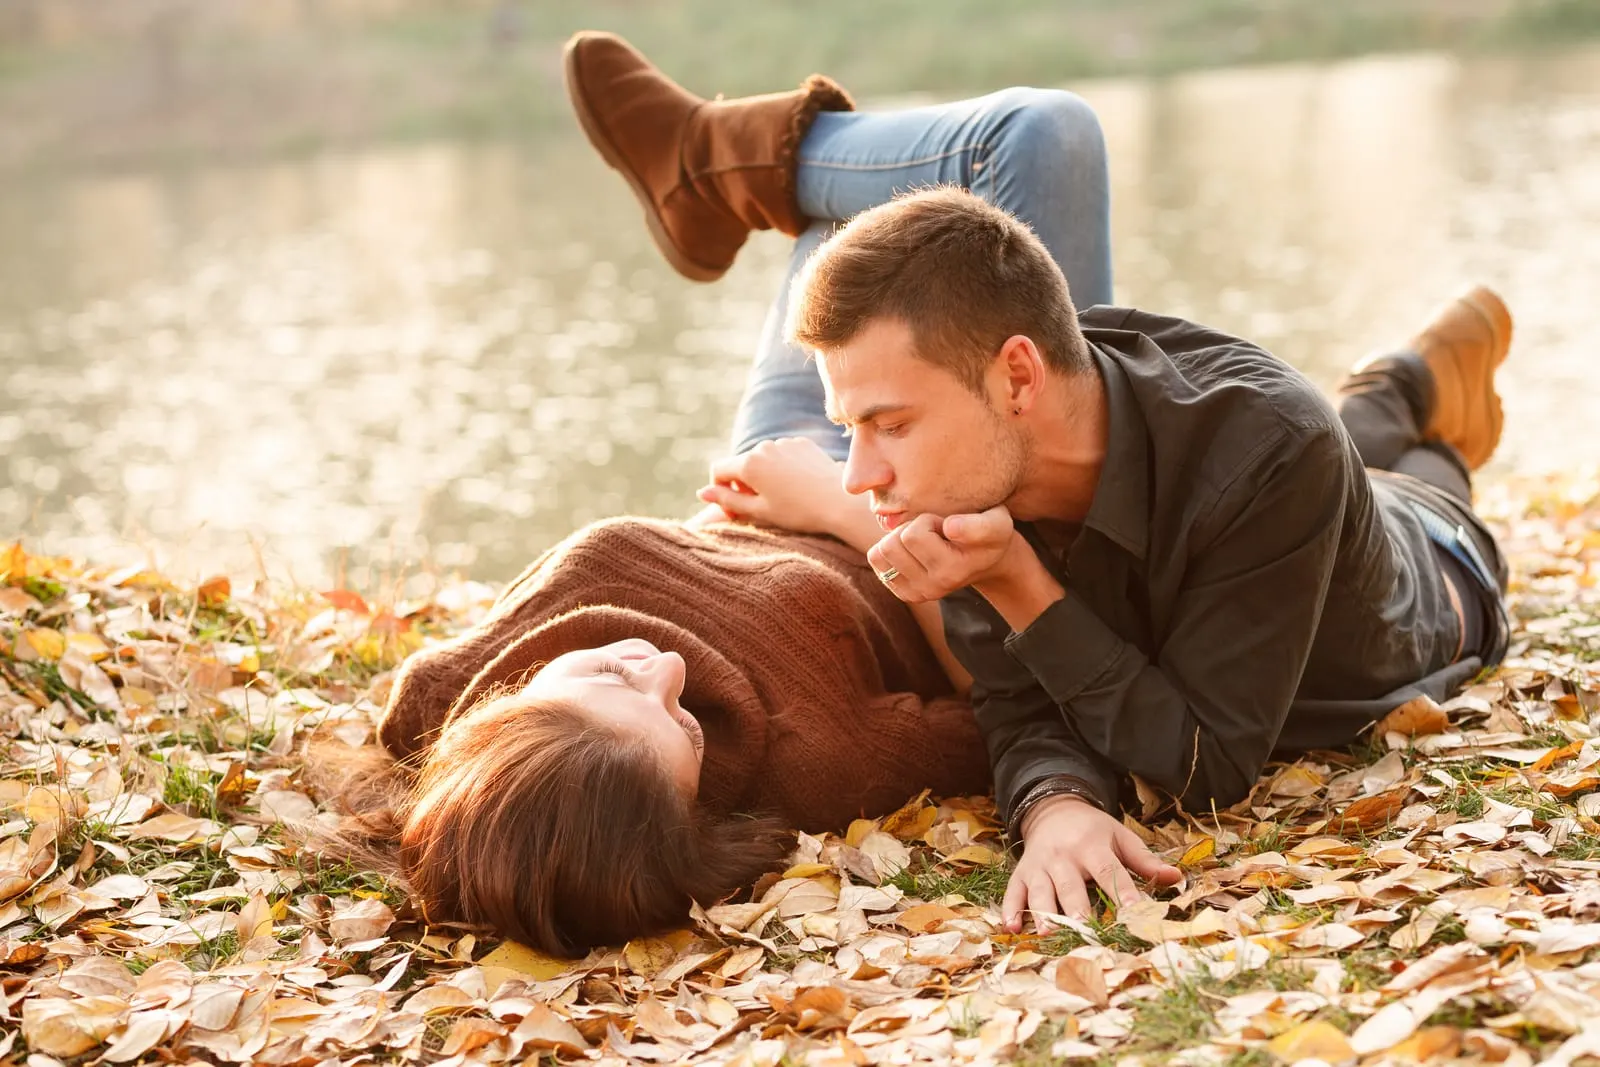 a man and a woman lie on dry leaves in autumn